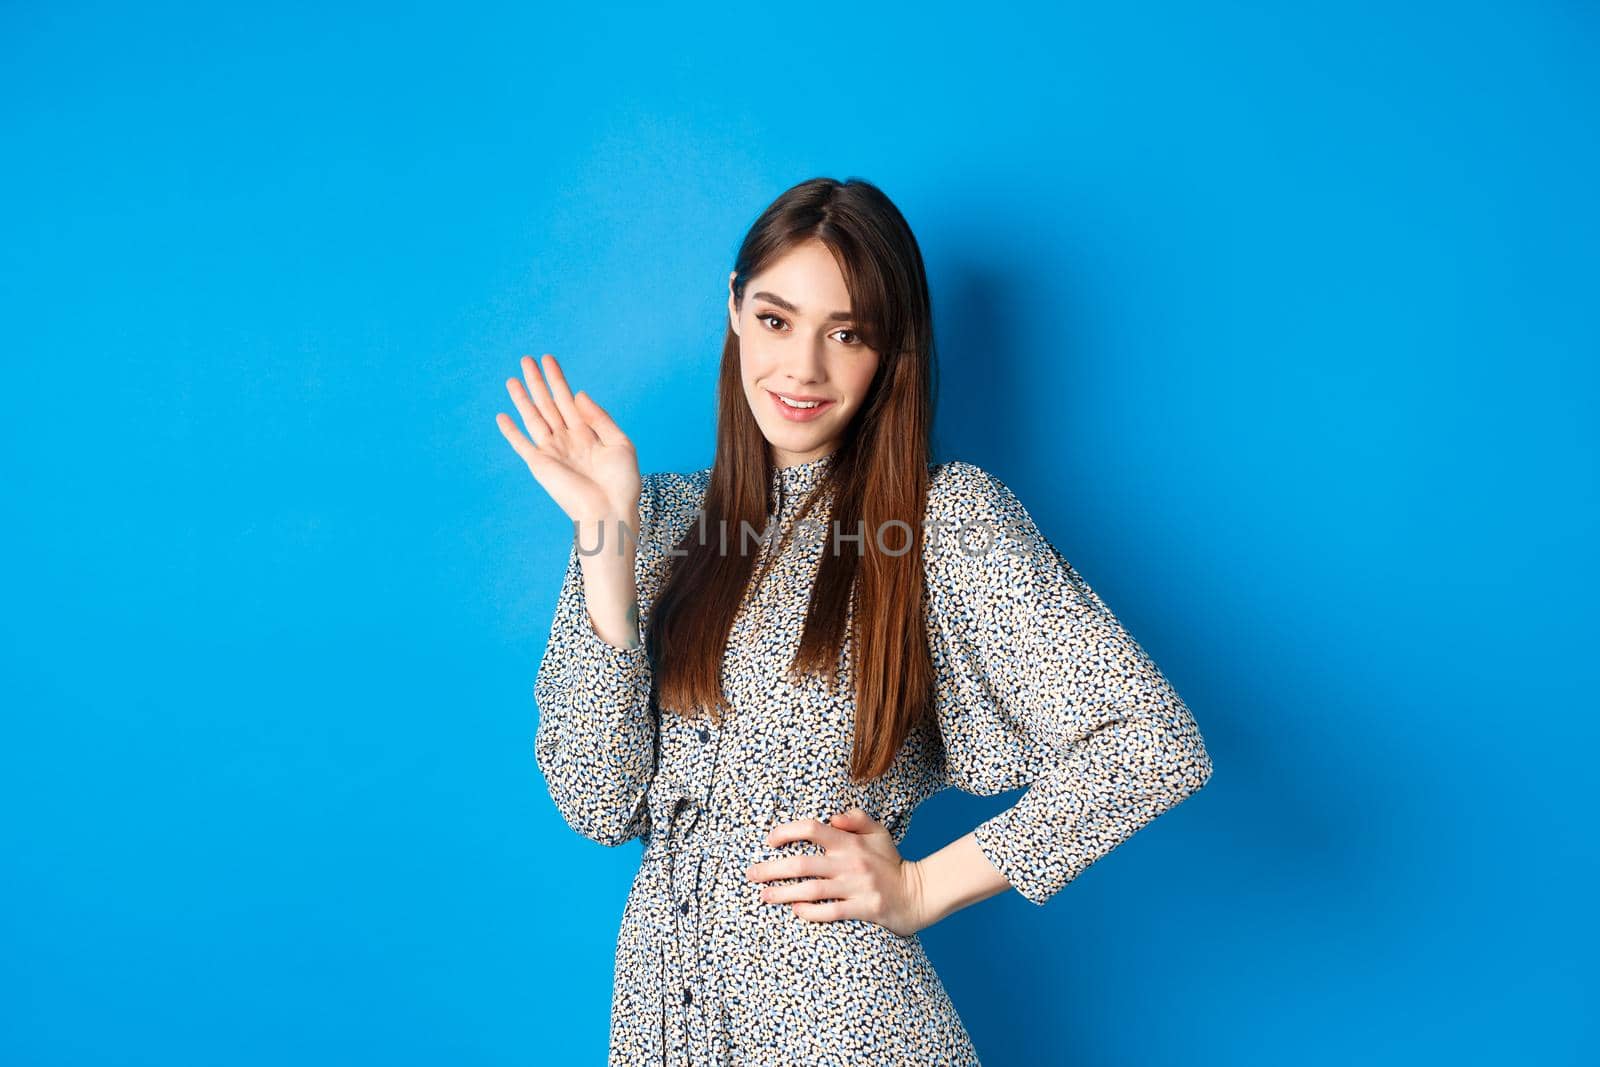 Beautiful lady in dress waving hand and say hello, greeting you with cute smile, standing on blue background.